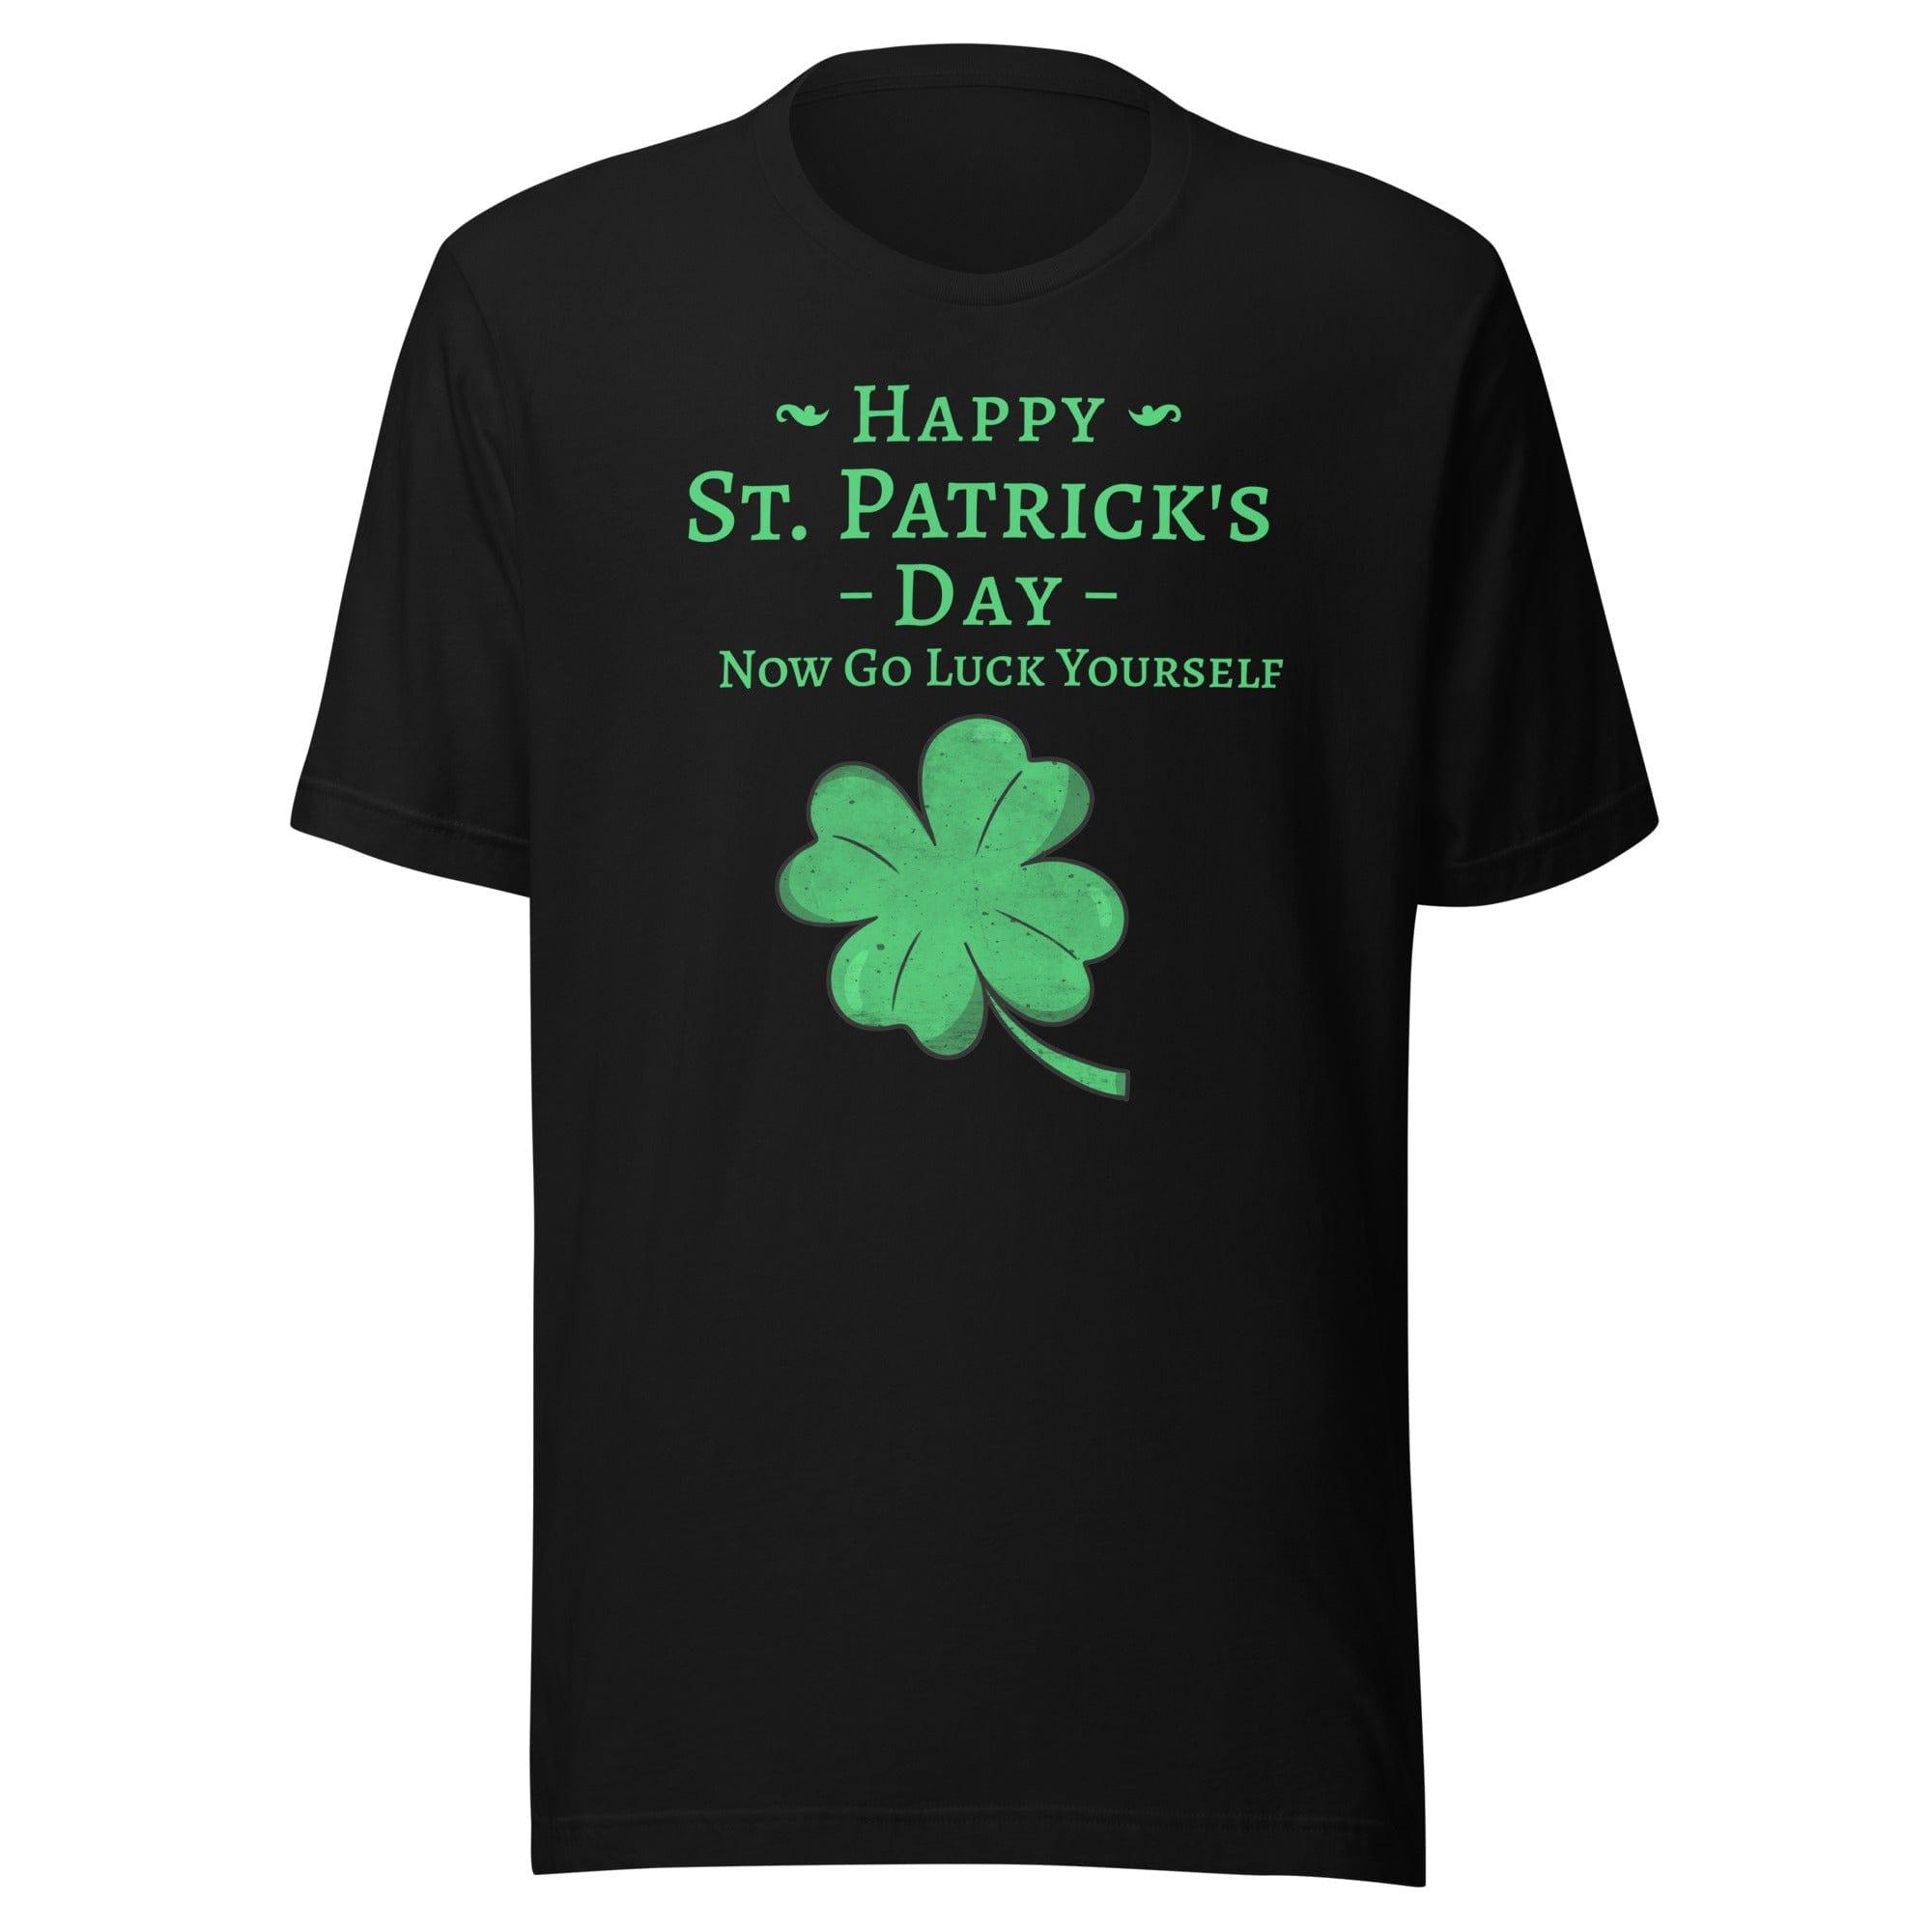 Happy St. Patrick's Day T-shirt Now Go Luck Yourself with Four Leaf Clover Short Sleeve Unisex Top - TopKoalaTee